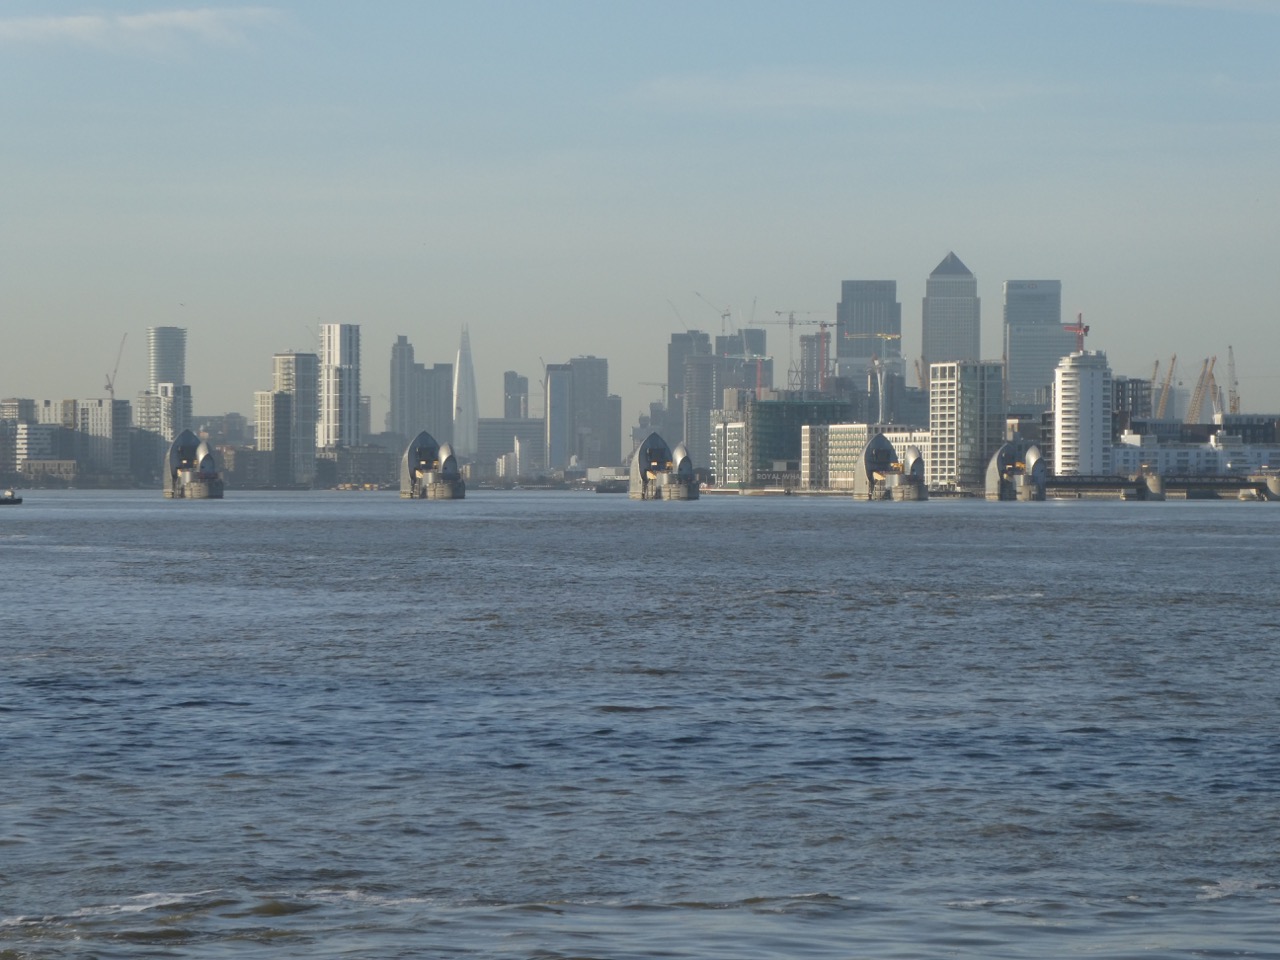 Thames Barrier and London skyline from the ferry